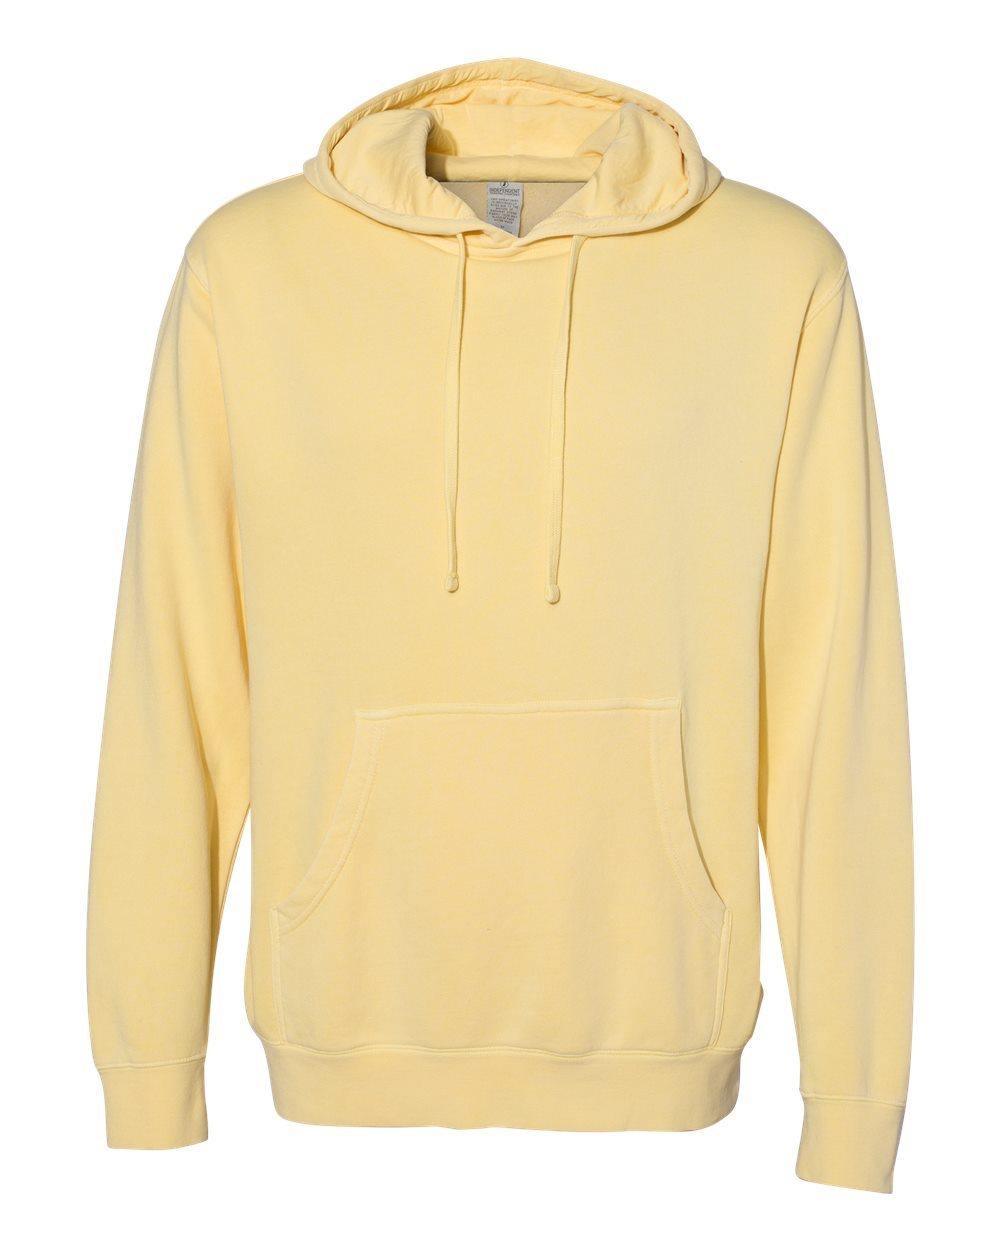 Blank Pigment Dyed Hoodies - Constantly Create Shop